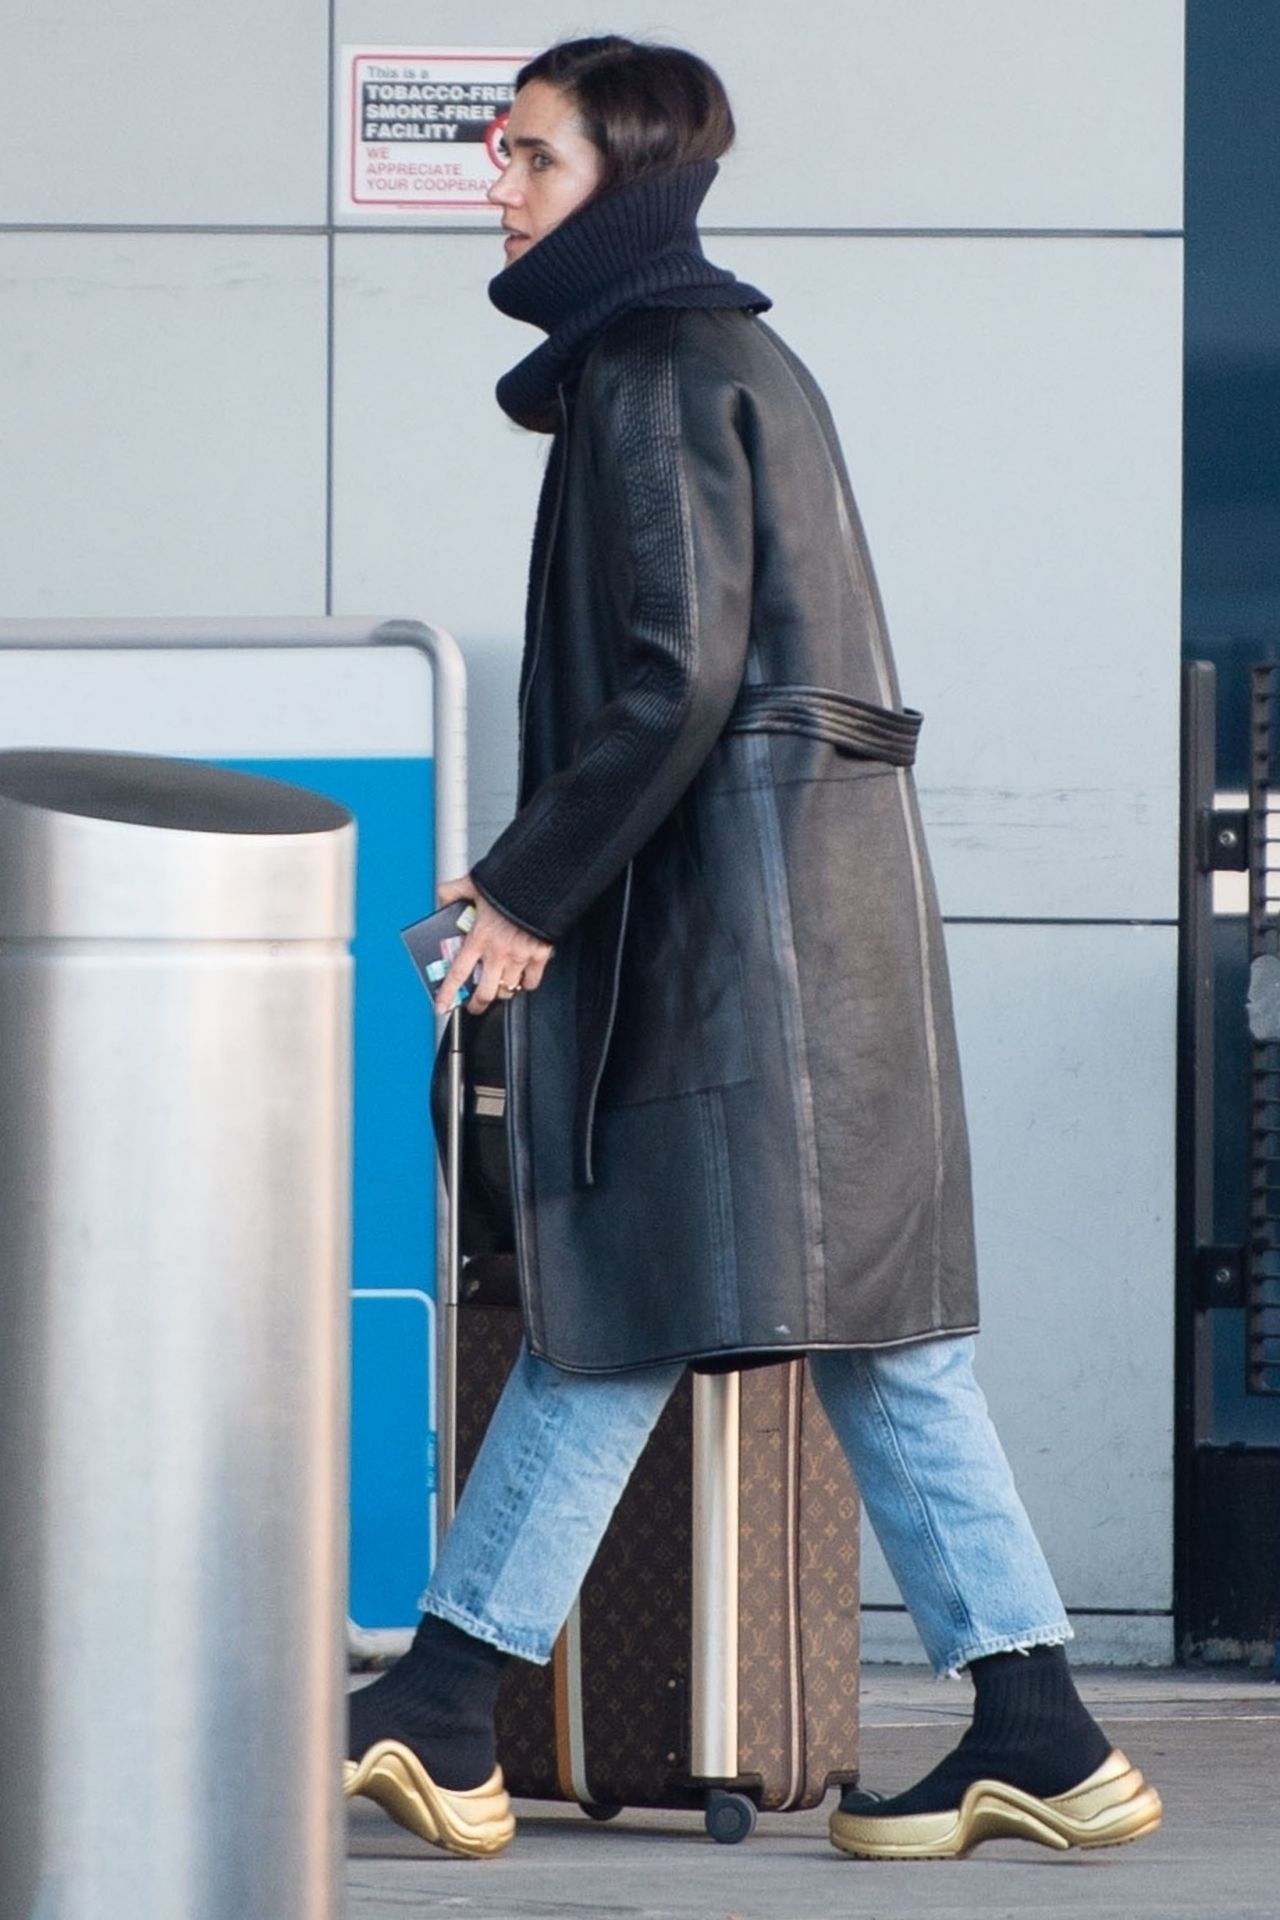 Jennifer Connelly – Seen at JFK Airport in New York - FamousFix.com post